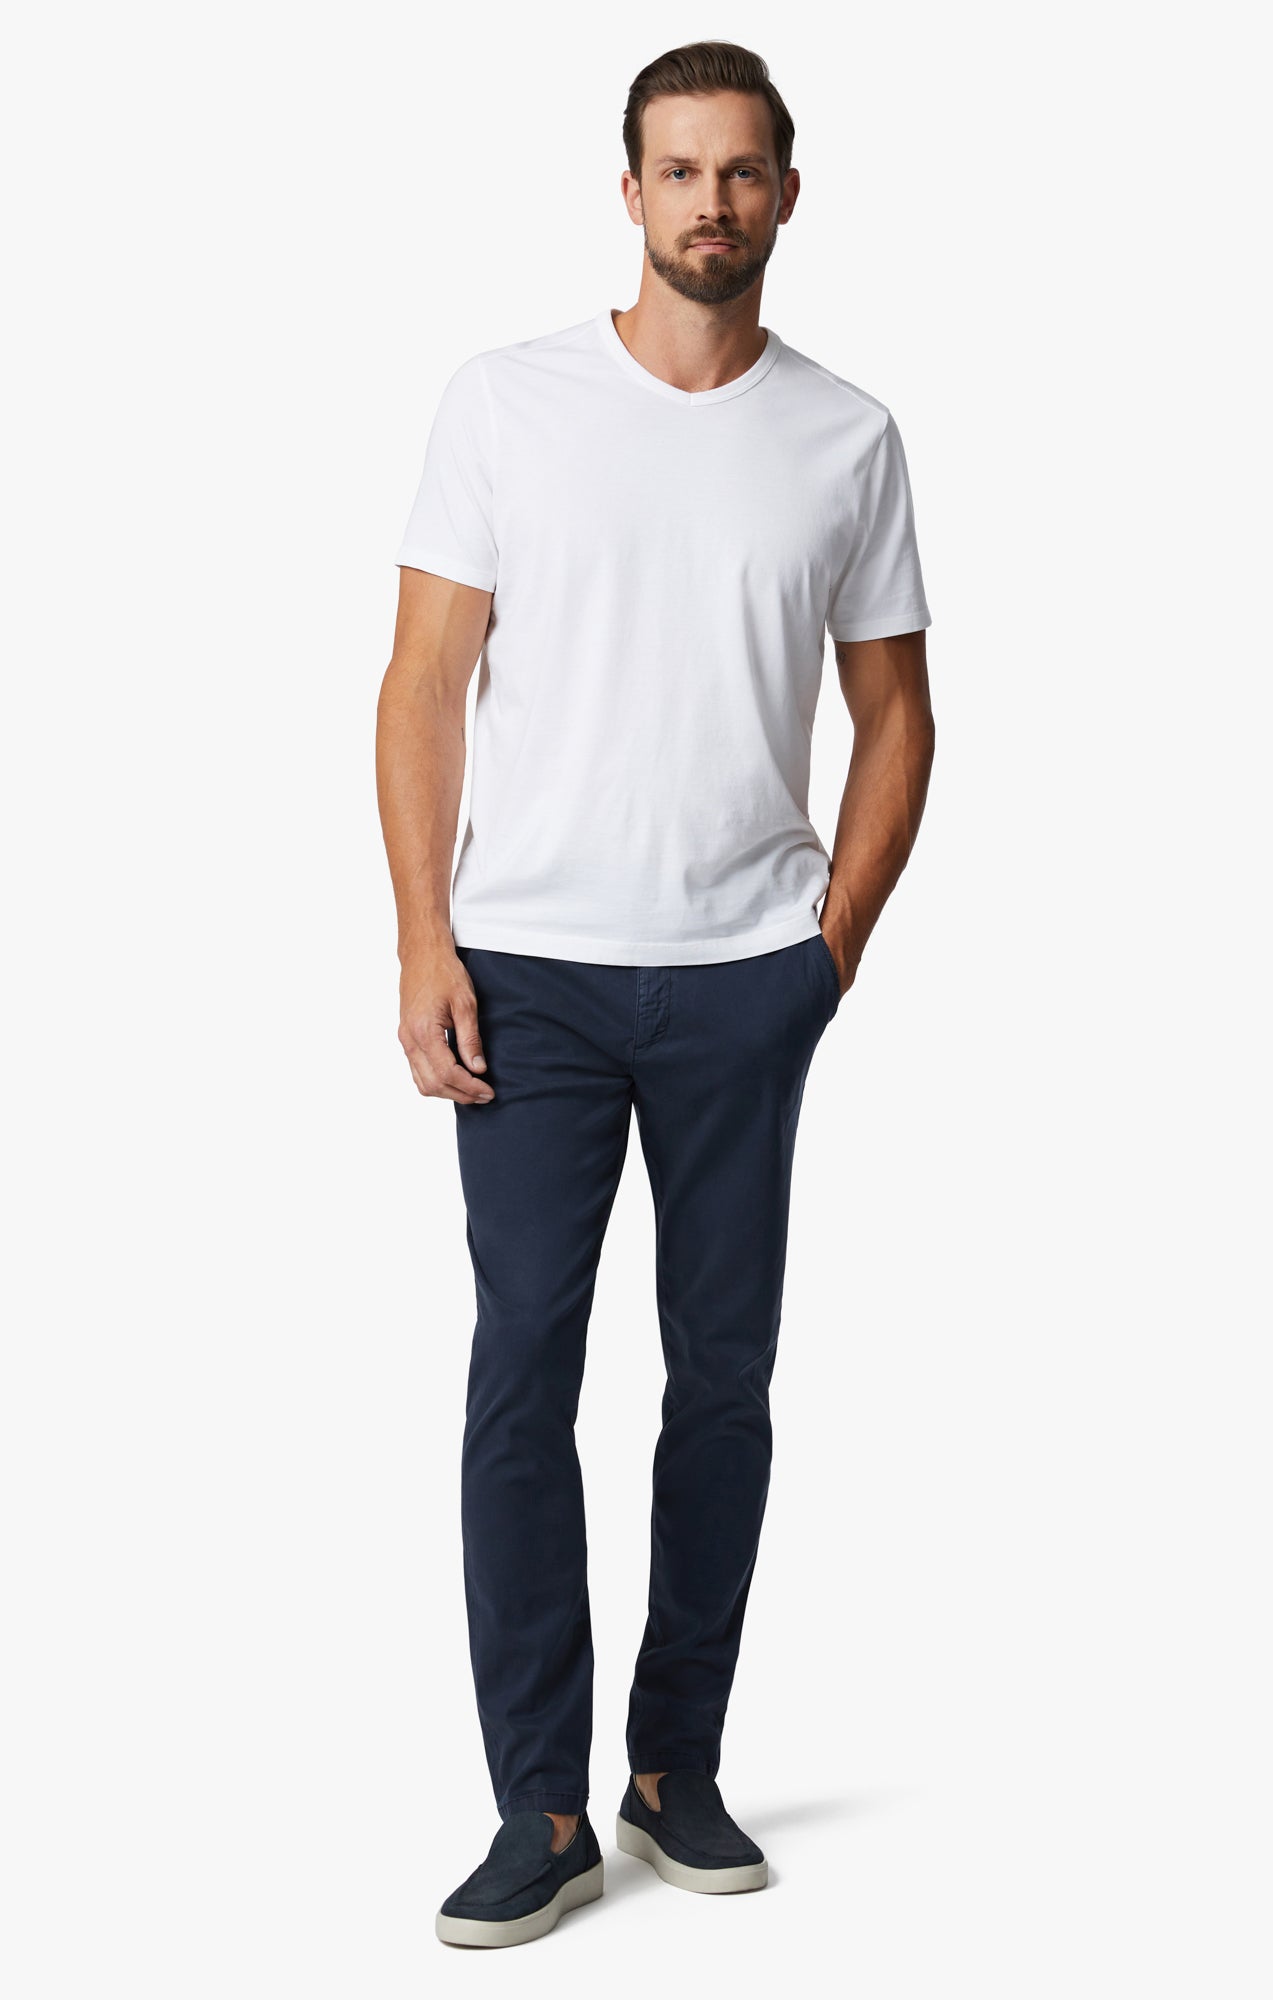 Formia Drawstring Chino Pants In Navy Soft Touch Image 2